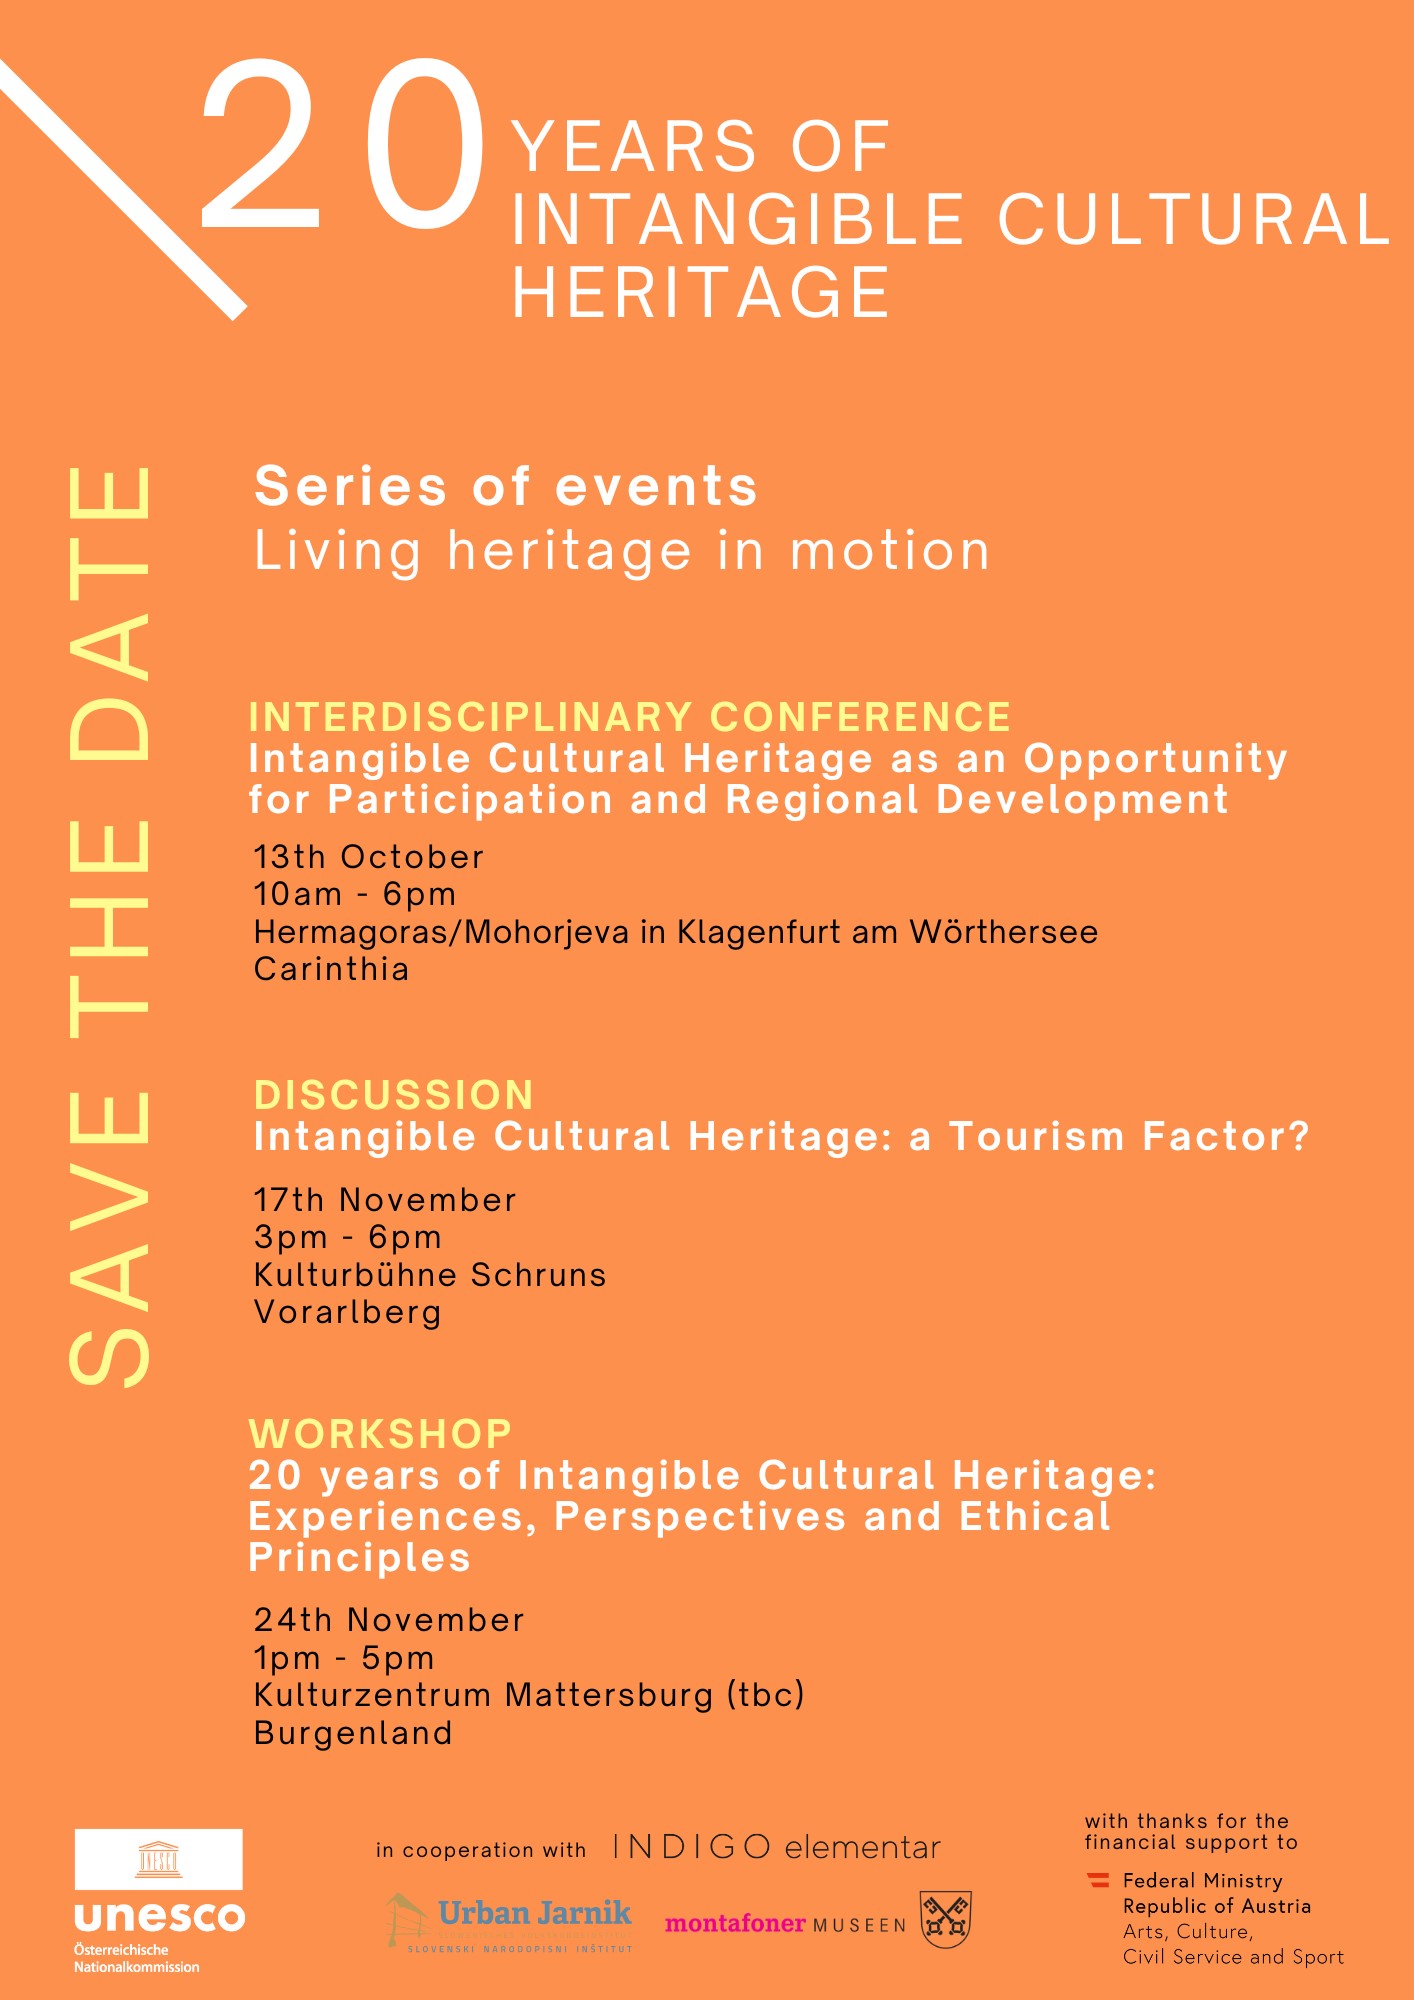 Event-series on living heritage throughout Austria 